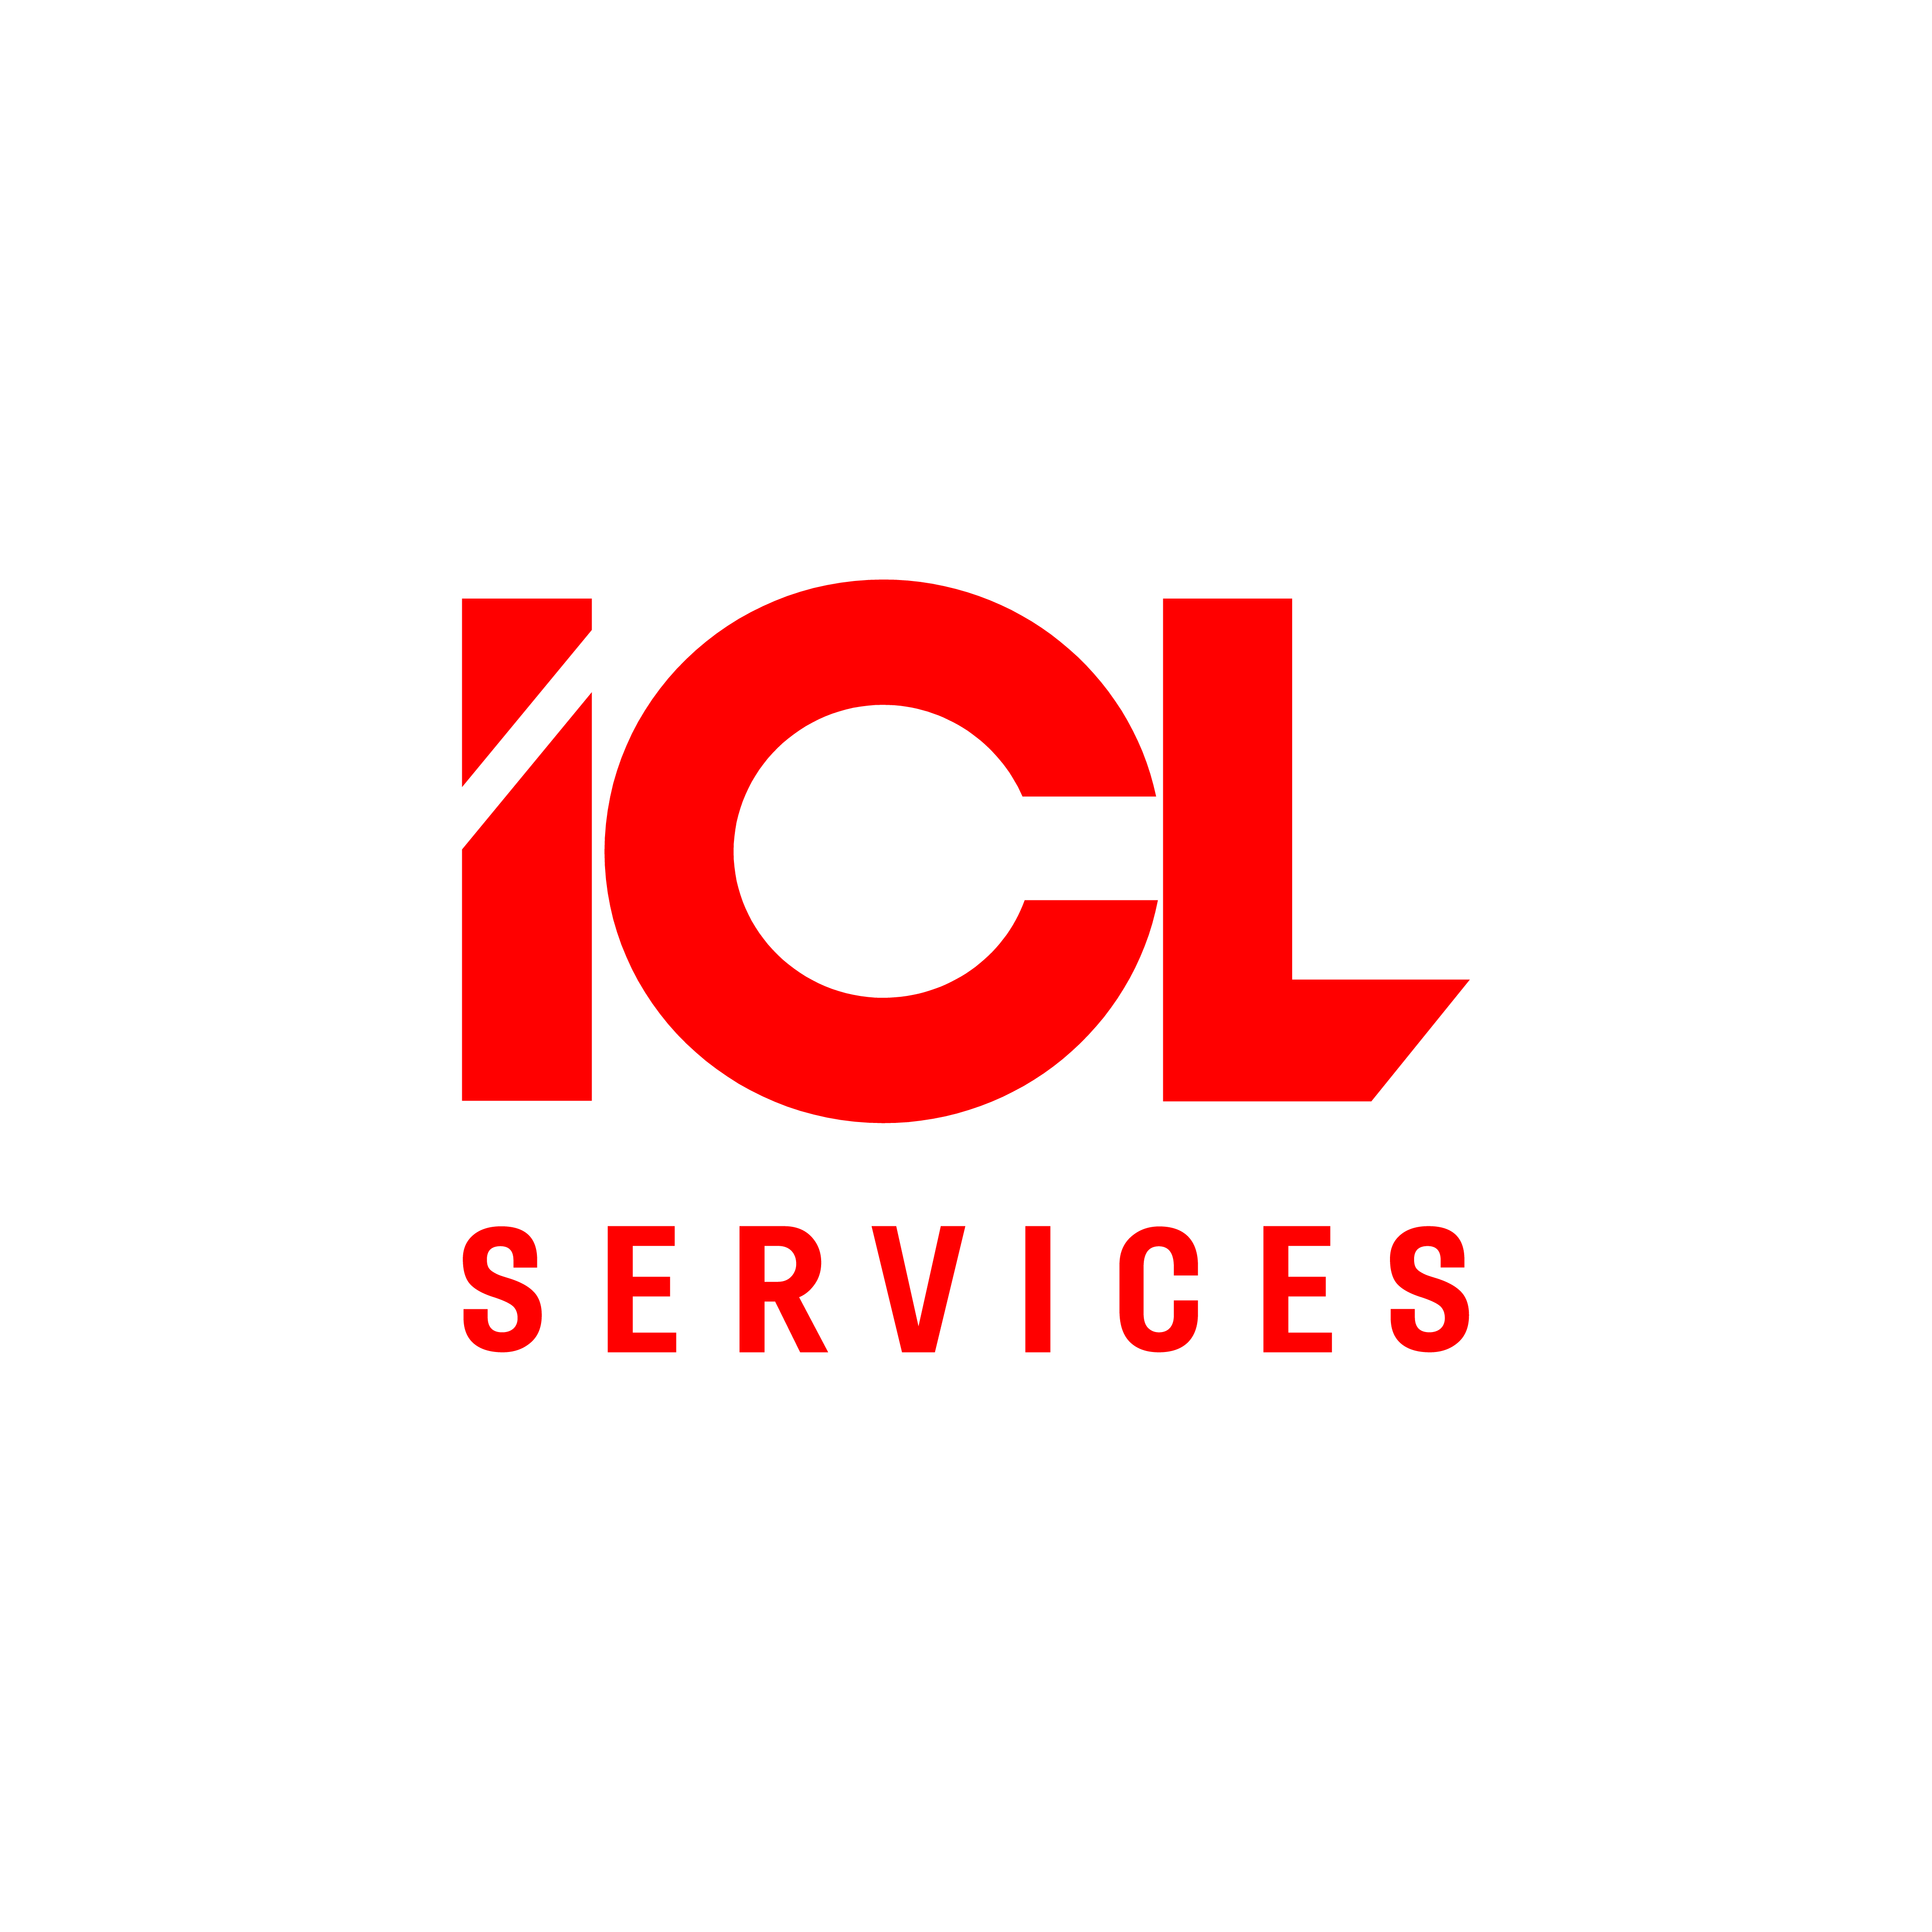 ICL Logo - File:ICL SERVICES Logo.png - Wikimedia Commons